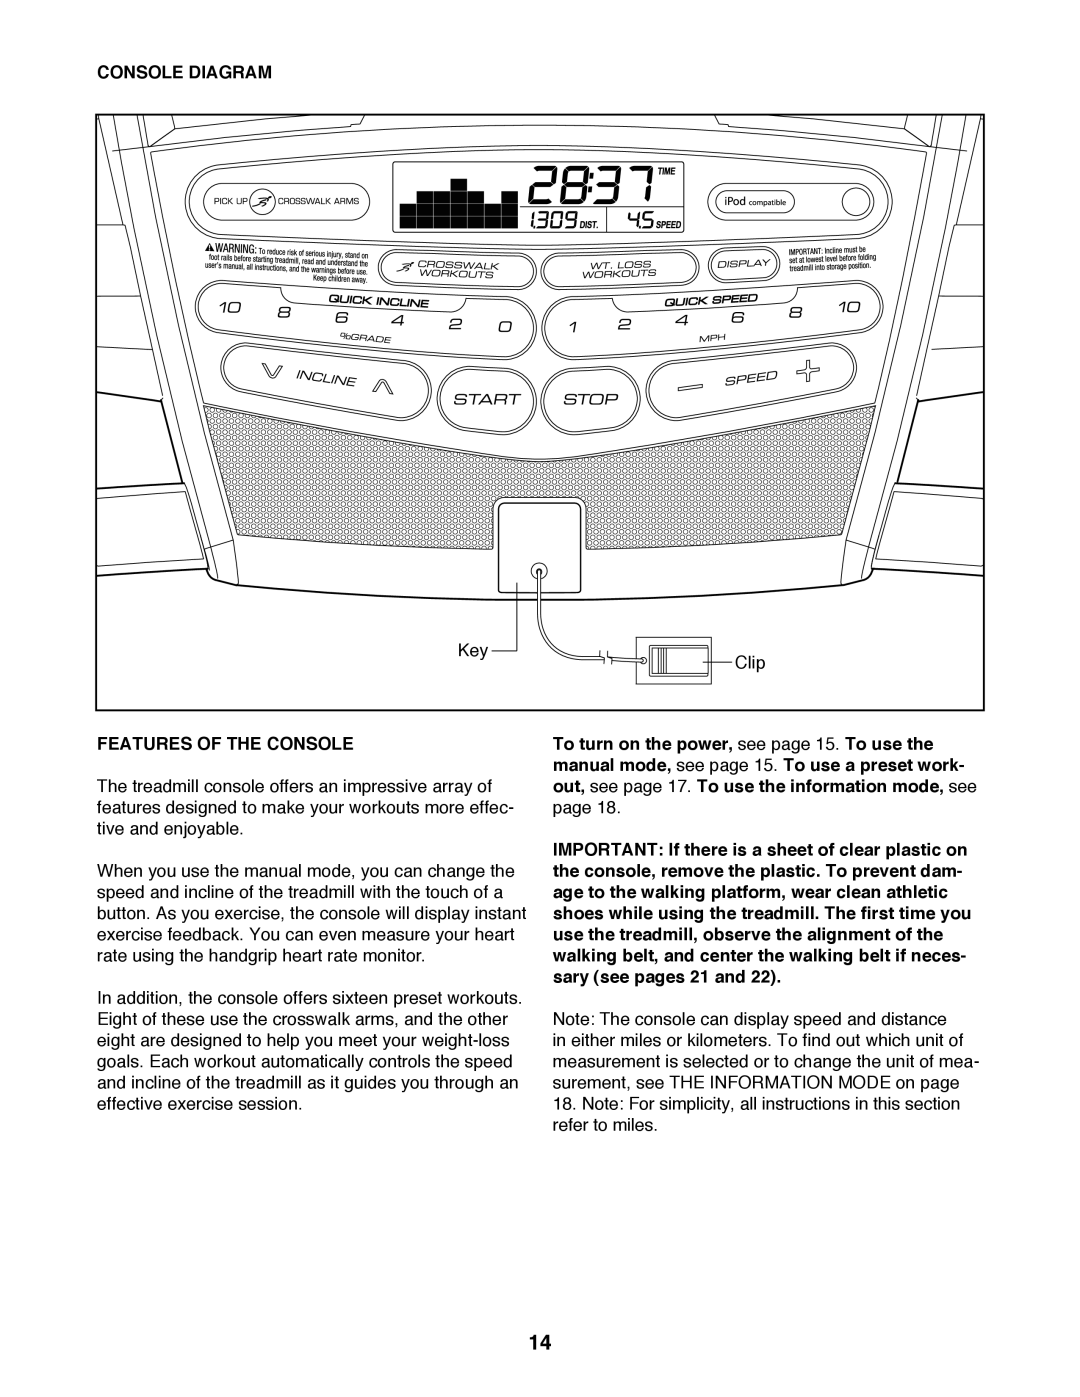 ProForm 397 user manual Console Diagram, Features Of The Console 